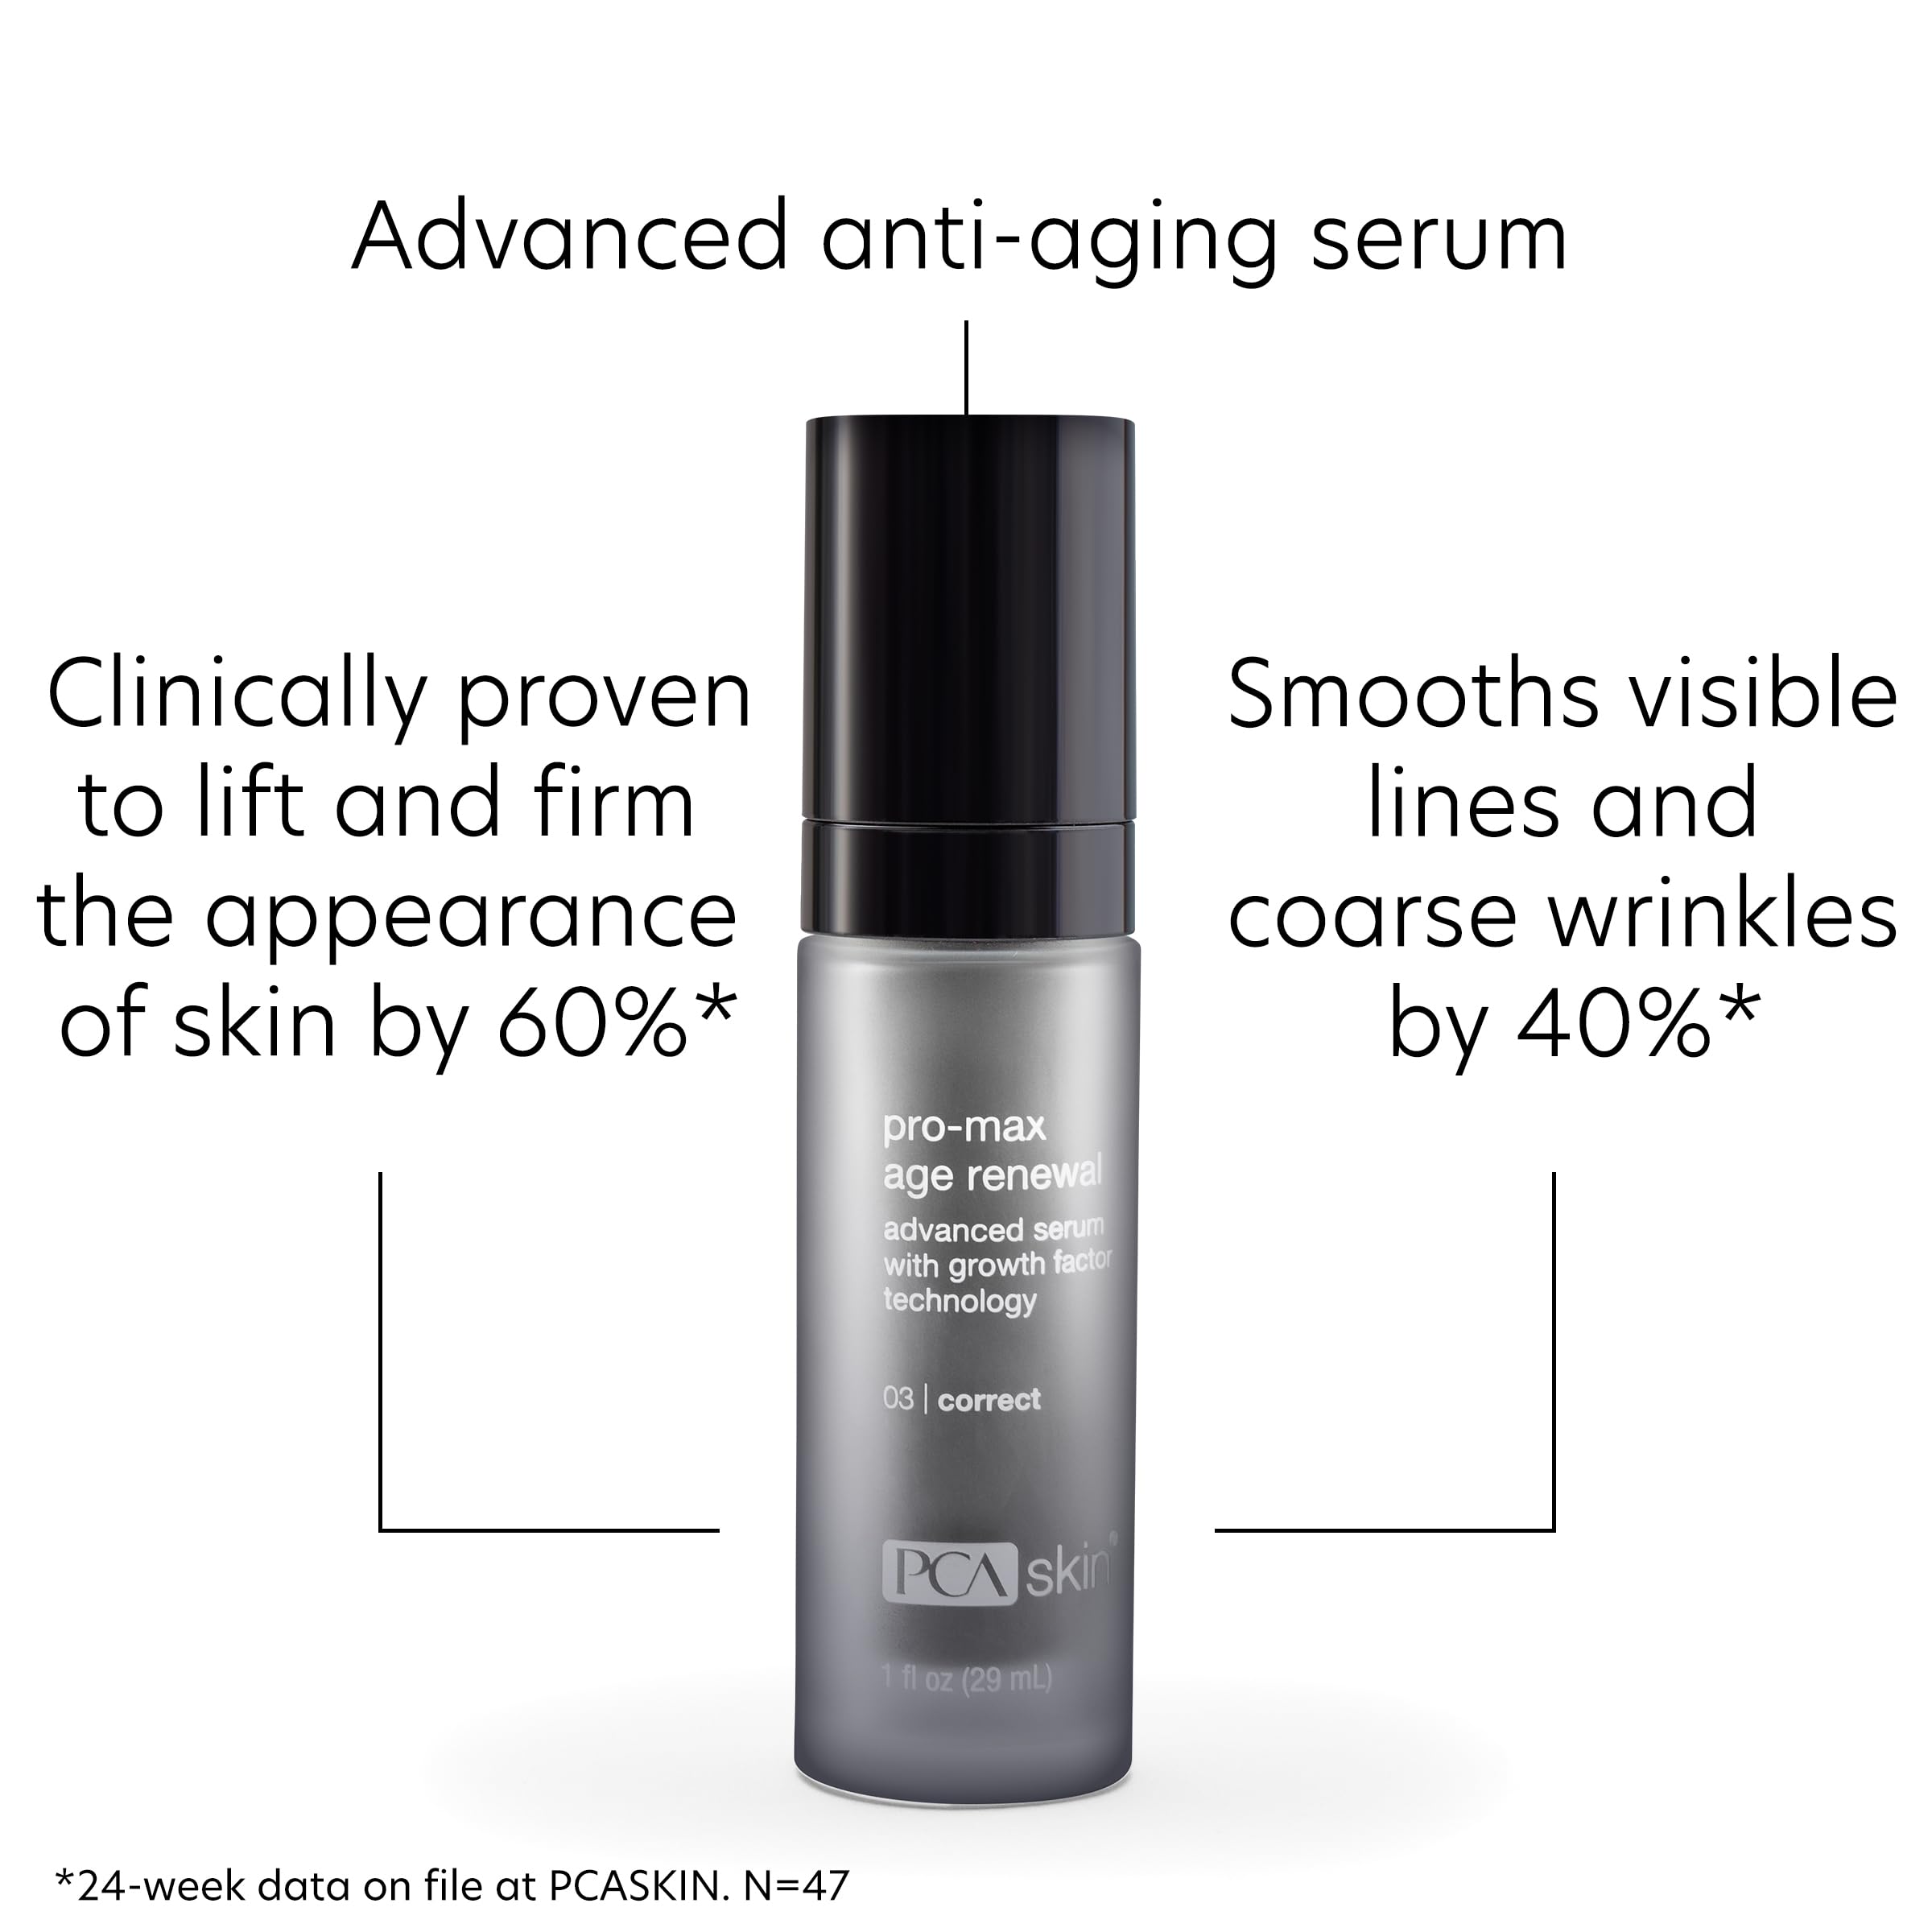 PCA SKIN Pro Max Age Renewal Anti Aging Face Serum, Micro Growth Factor Technology Serum for Reducing Wrinkles and Sagging Skin, Helps Lift and Firm Skin on Face and Neck, Safe For All Skin Types